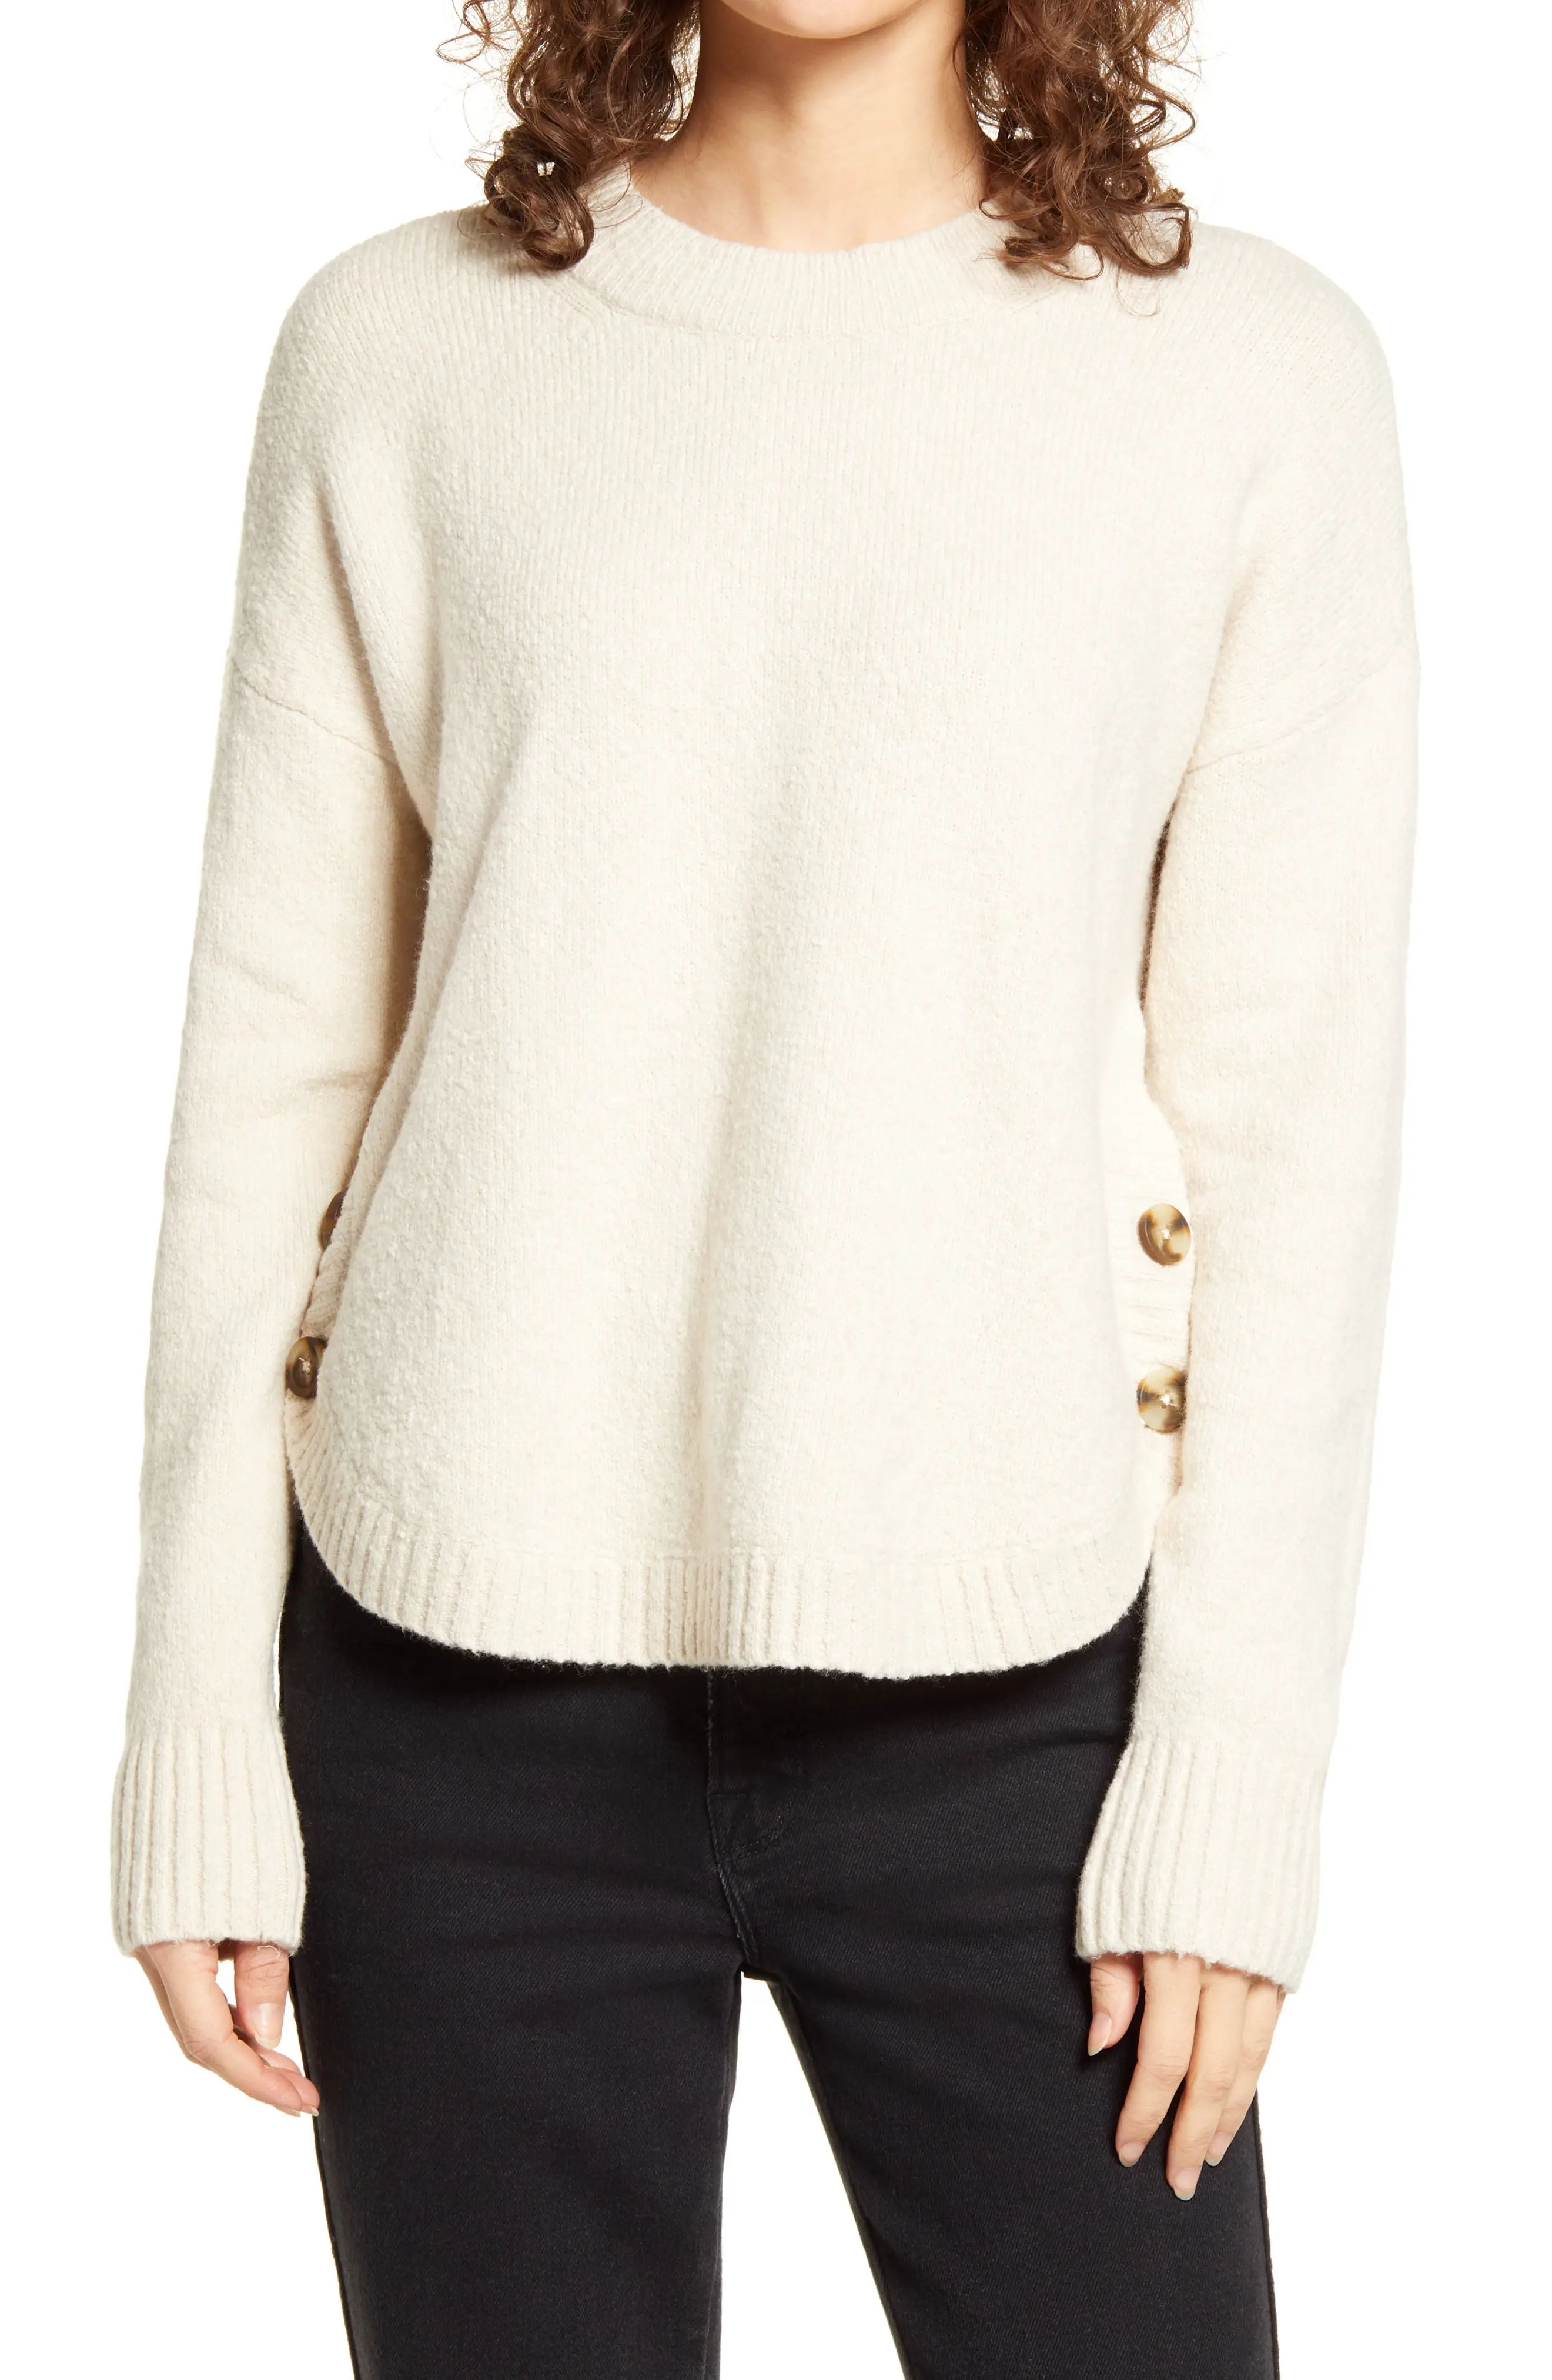 Women's Madewell Demi Side Button Sweater, Size Small - Beige | Nordstrom